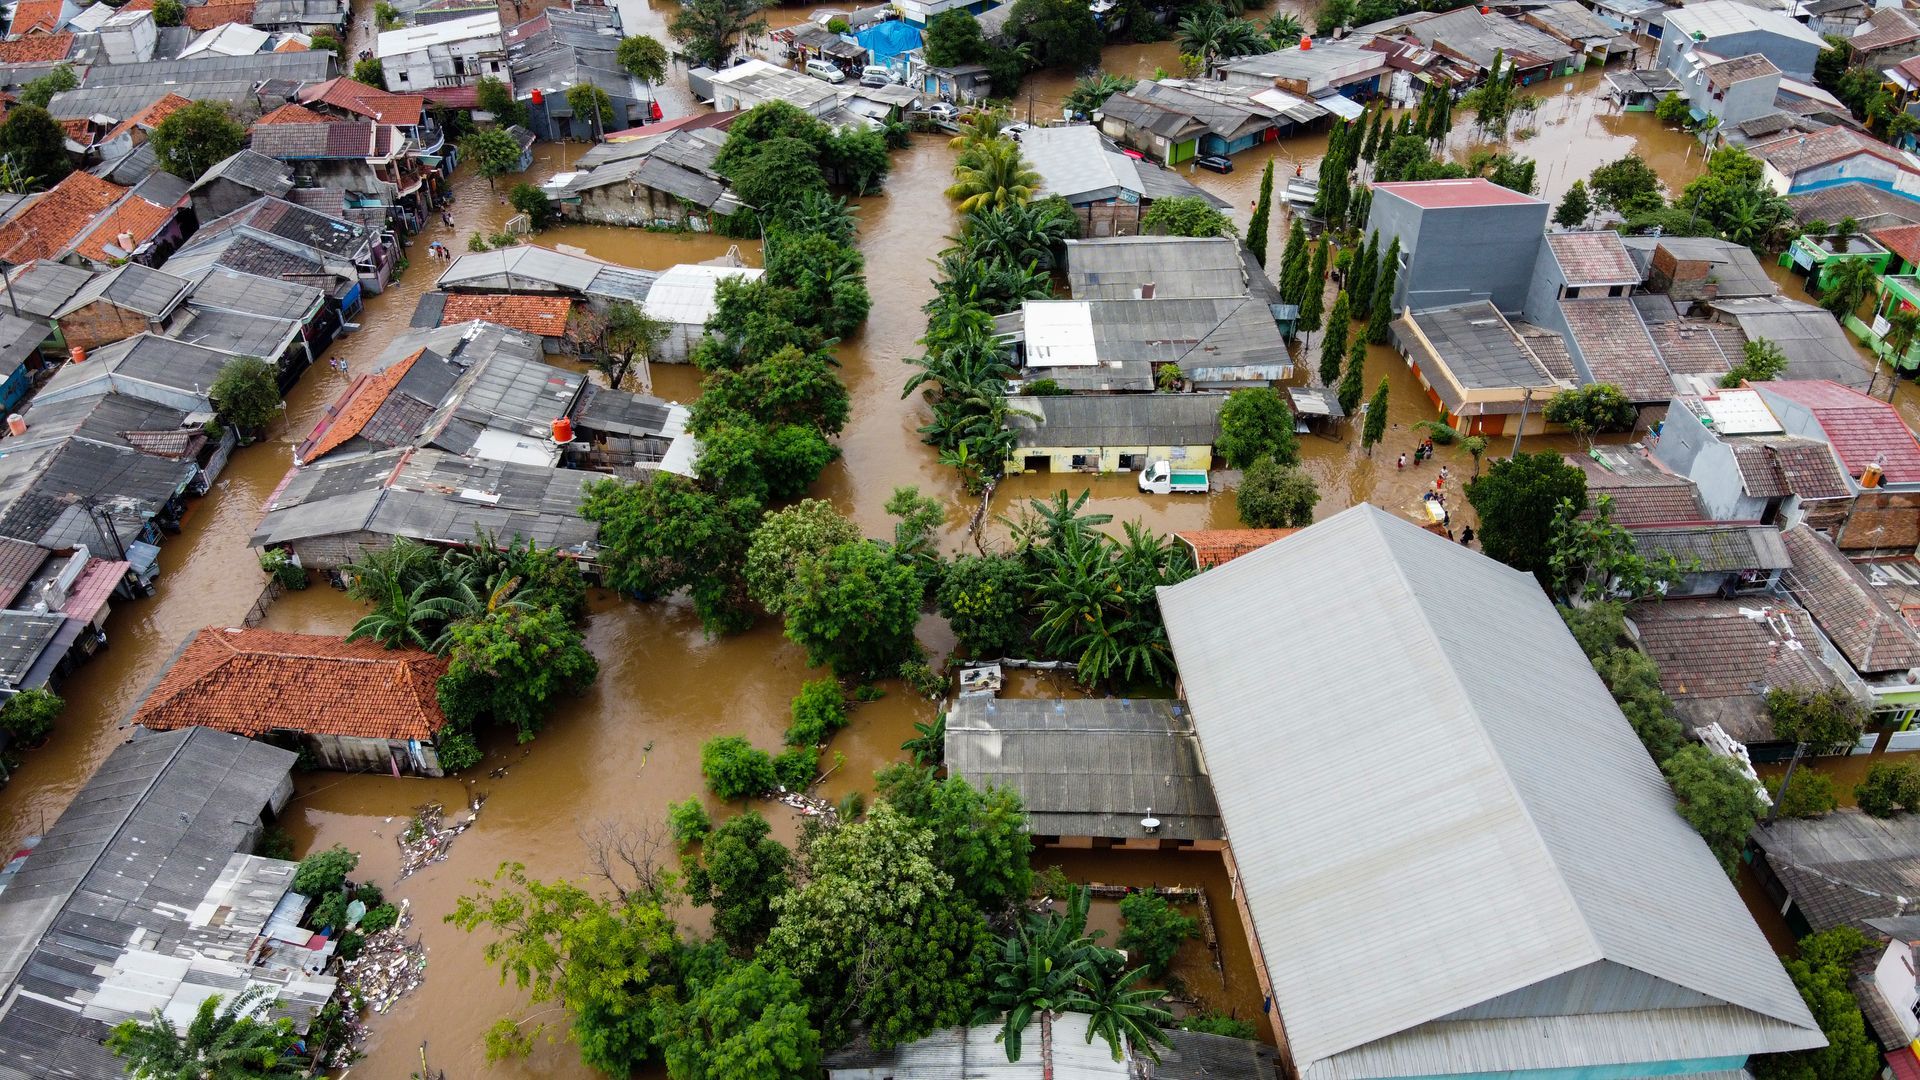 An aerial view of a town half-submerged in thick, muddy water.